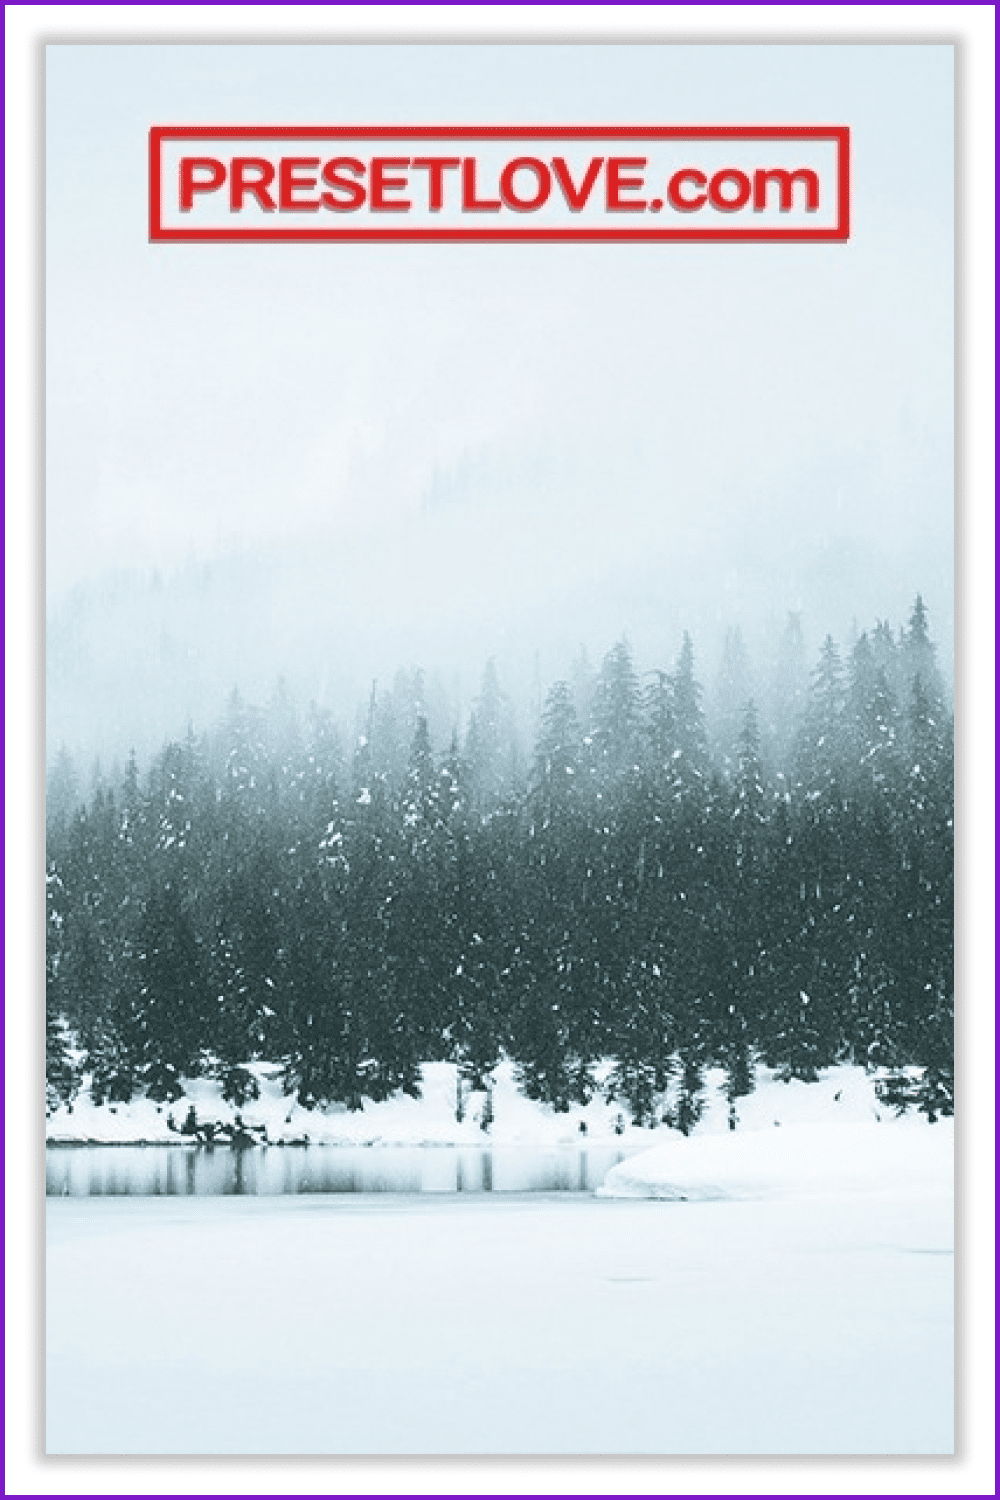 Photo of a lake in a snowy forest.